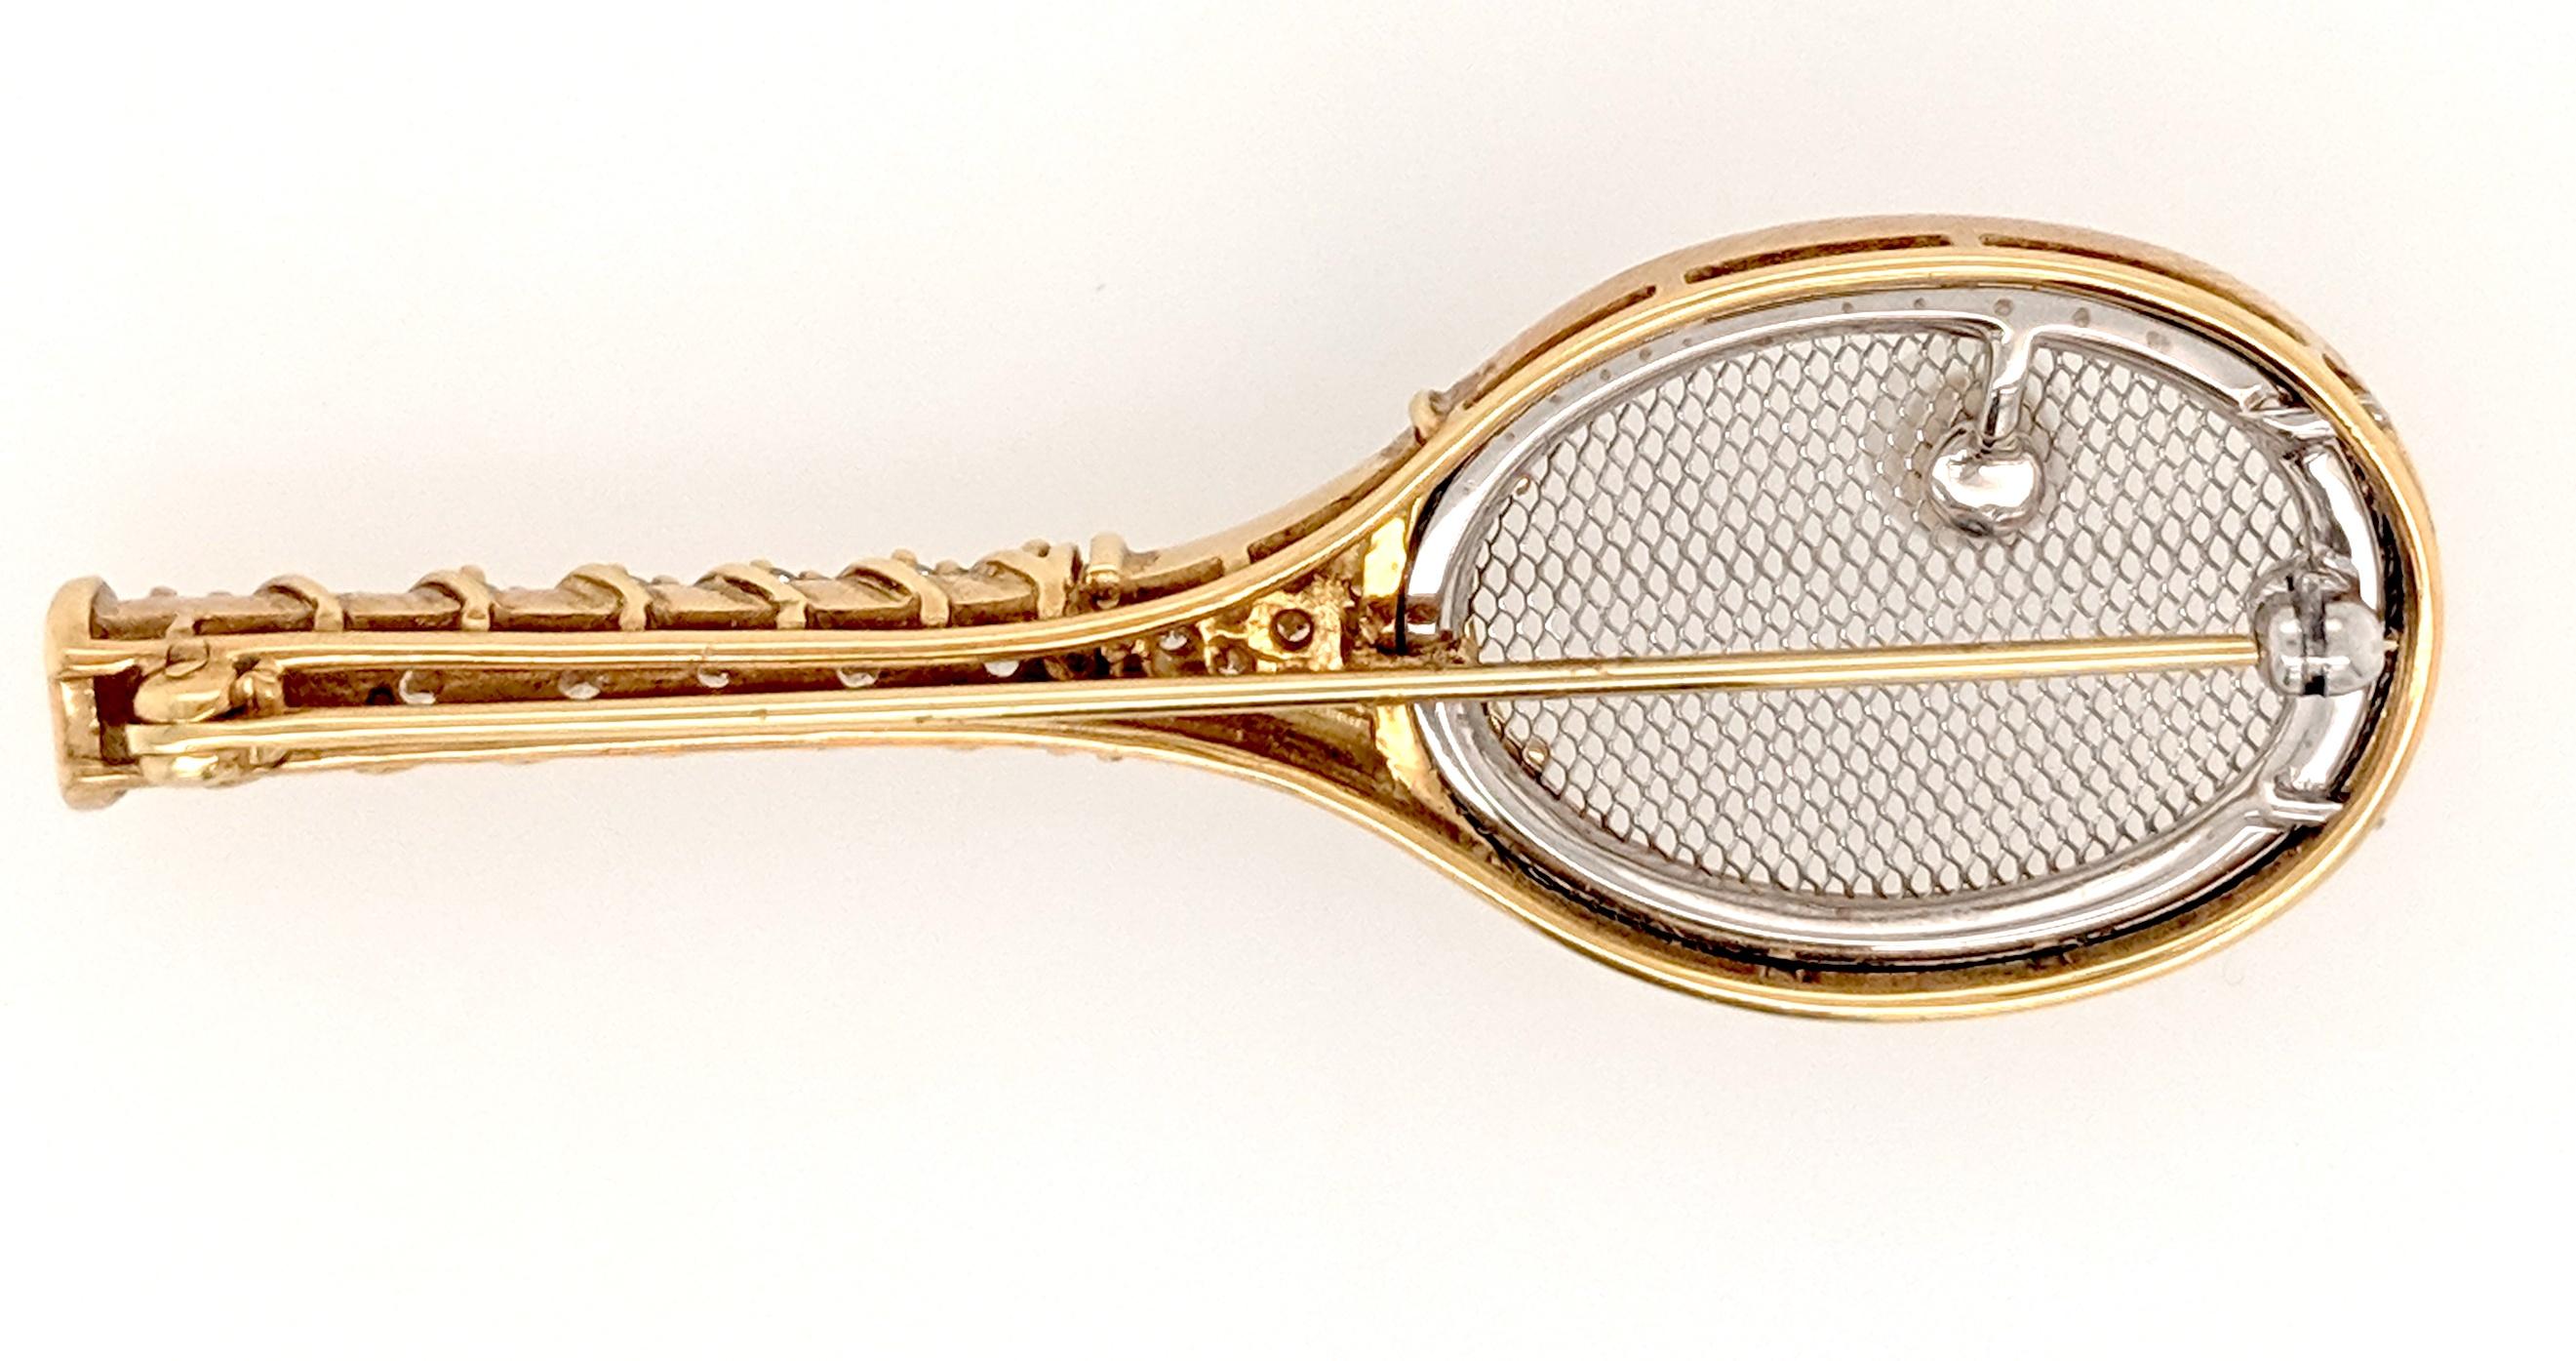 A Kurt Gaum Diamond tennis pin crafted in 18k yellow gold and Platinum featuring (24) brilliant round diamonds weighing approximately .68cttw with a color of F/G and a clarity of VS2. The racket is made in 18k yellow gold and the strings are all